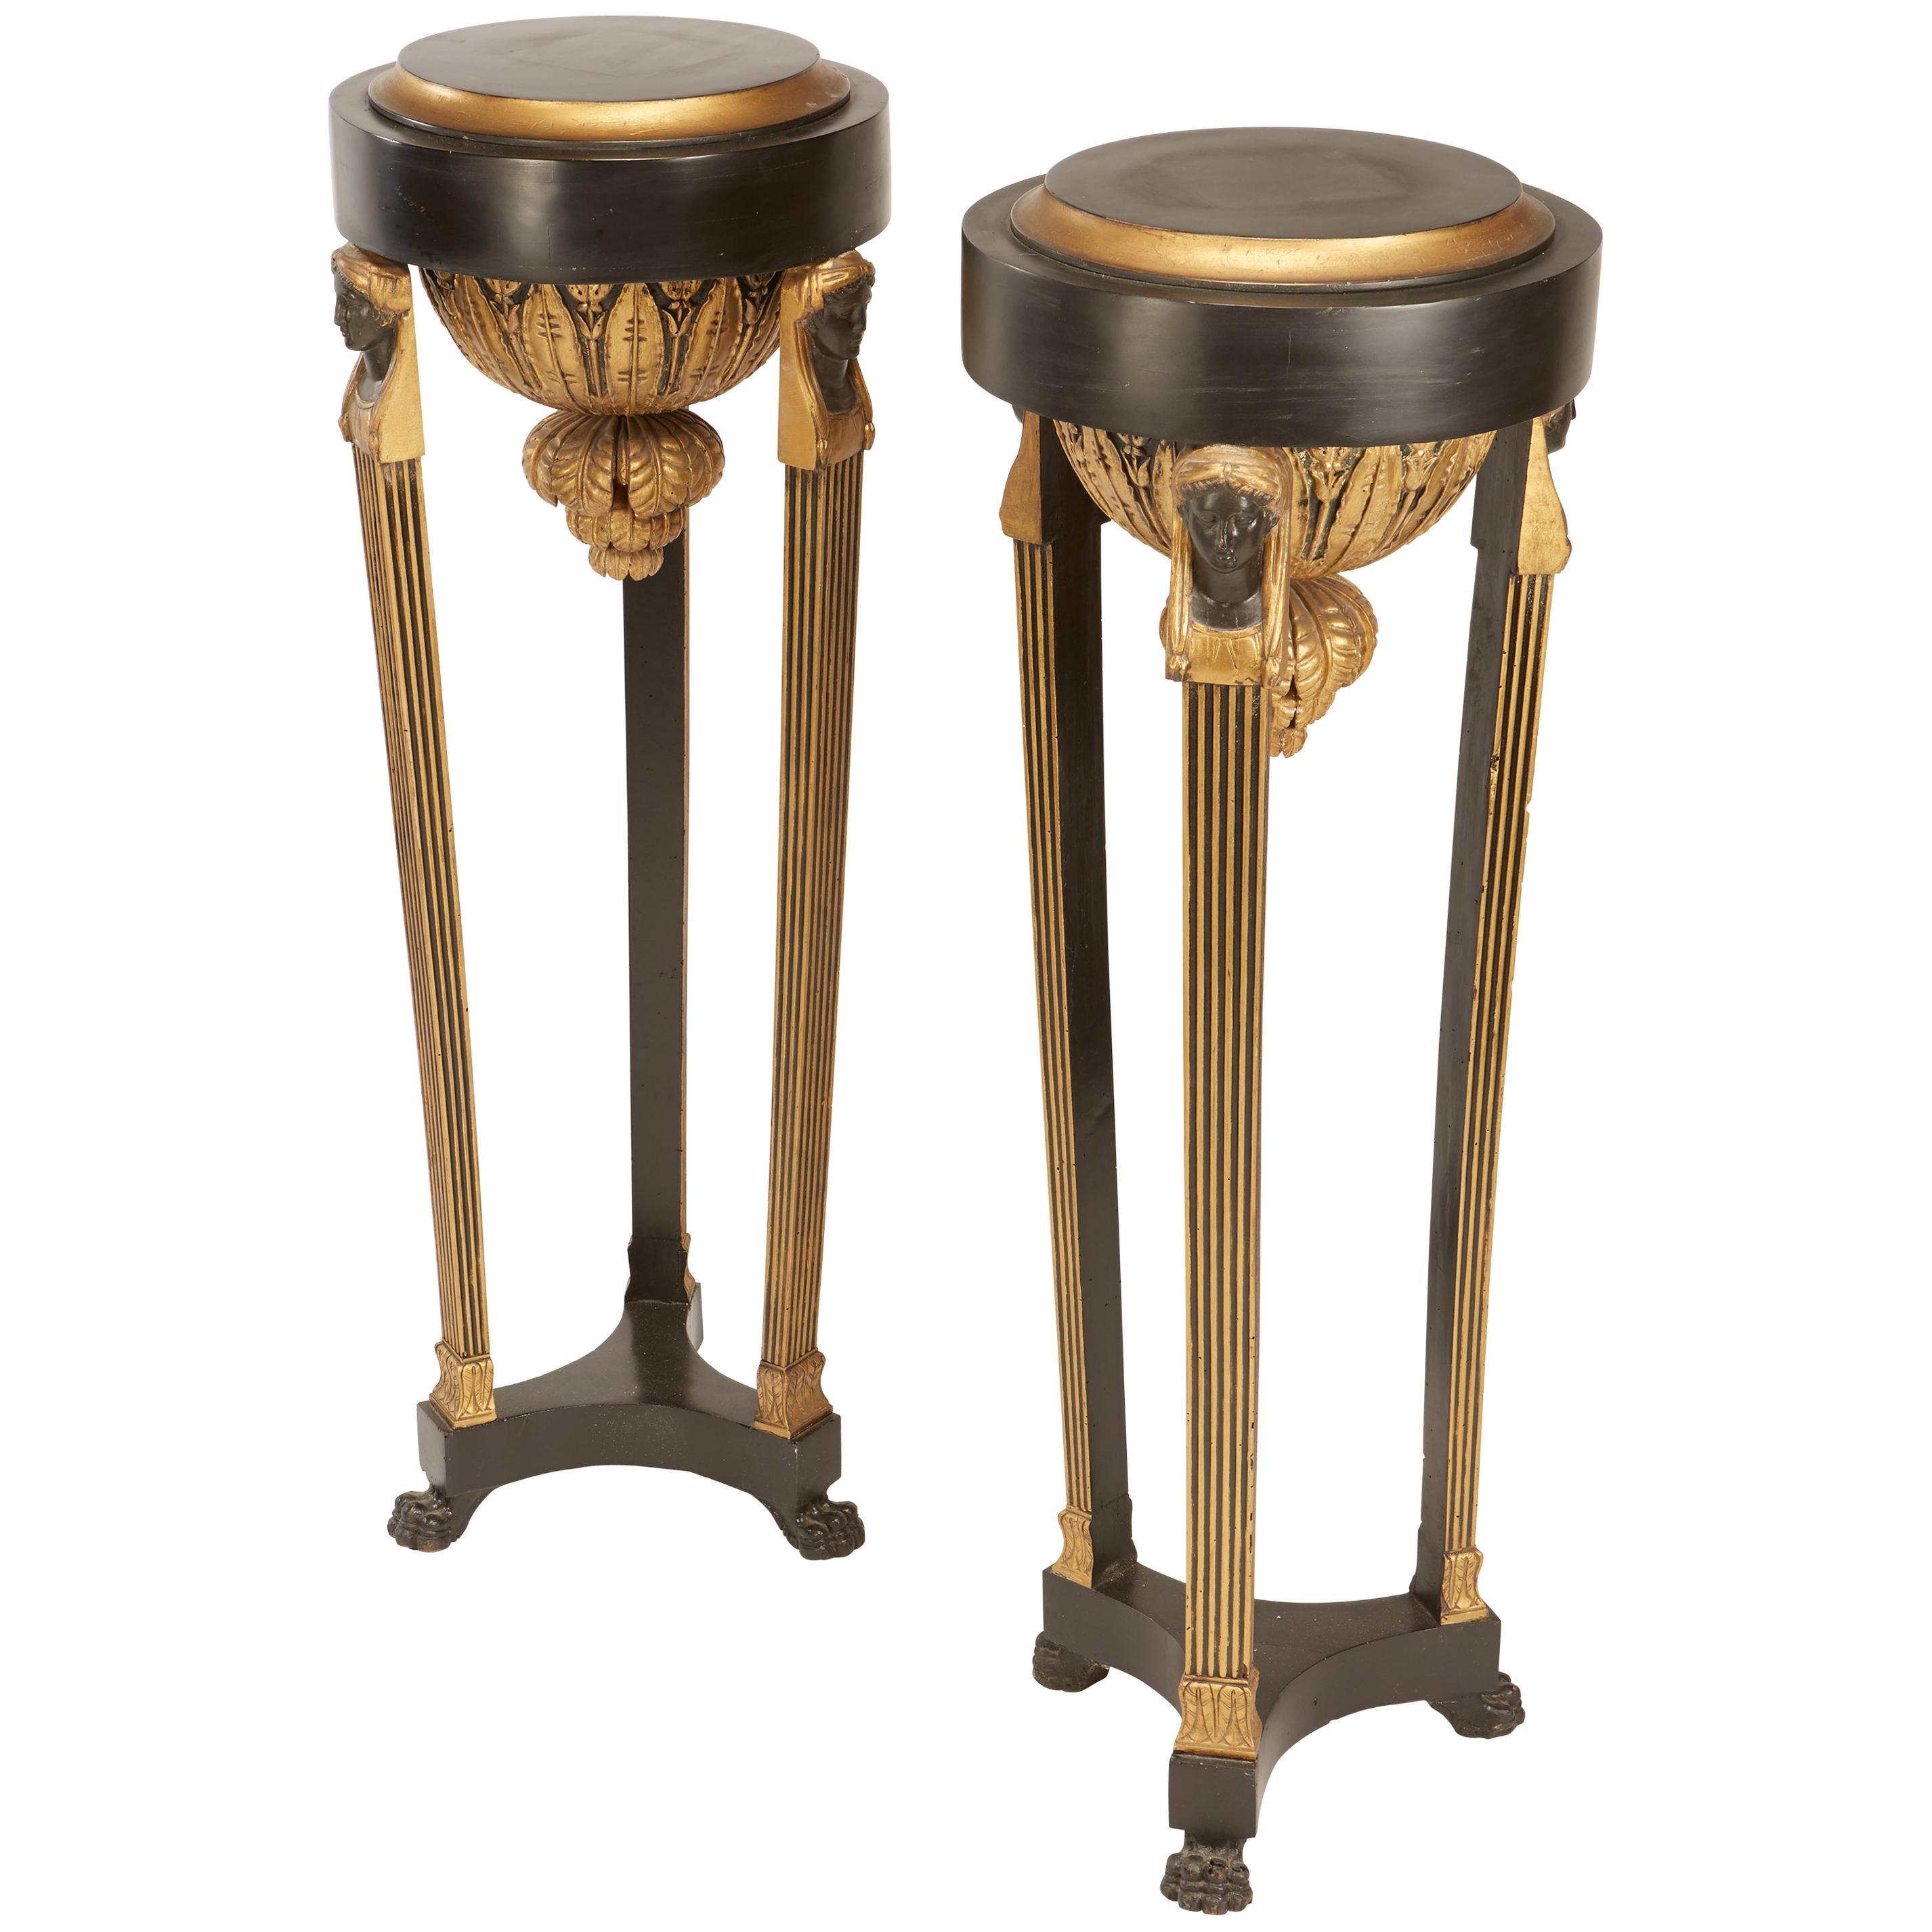 Pair of Continental Neoclassic Black Painted and Parcel-gilt Torcheres, Italian